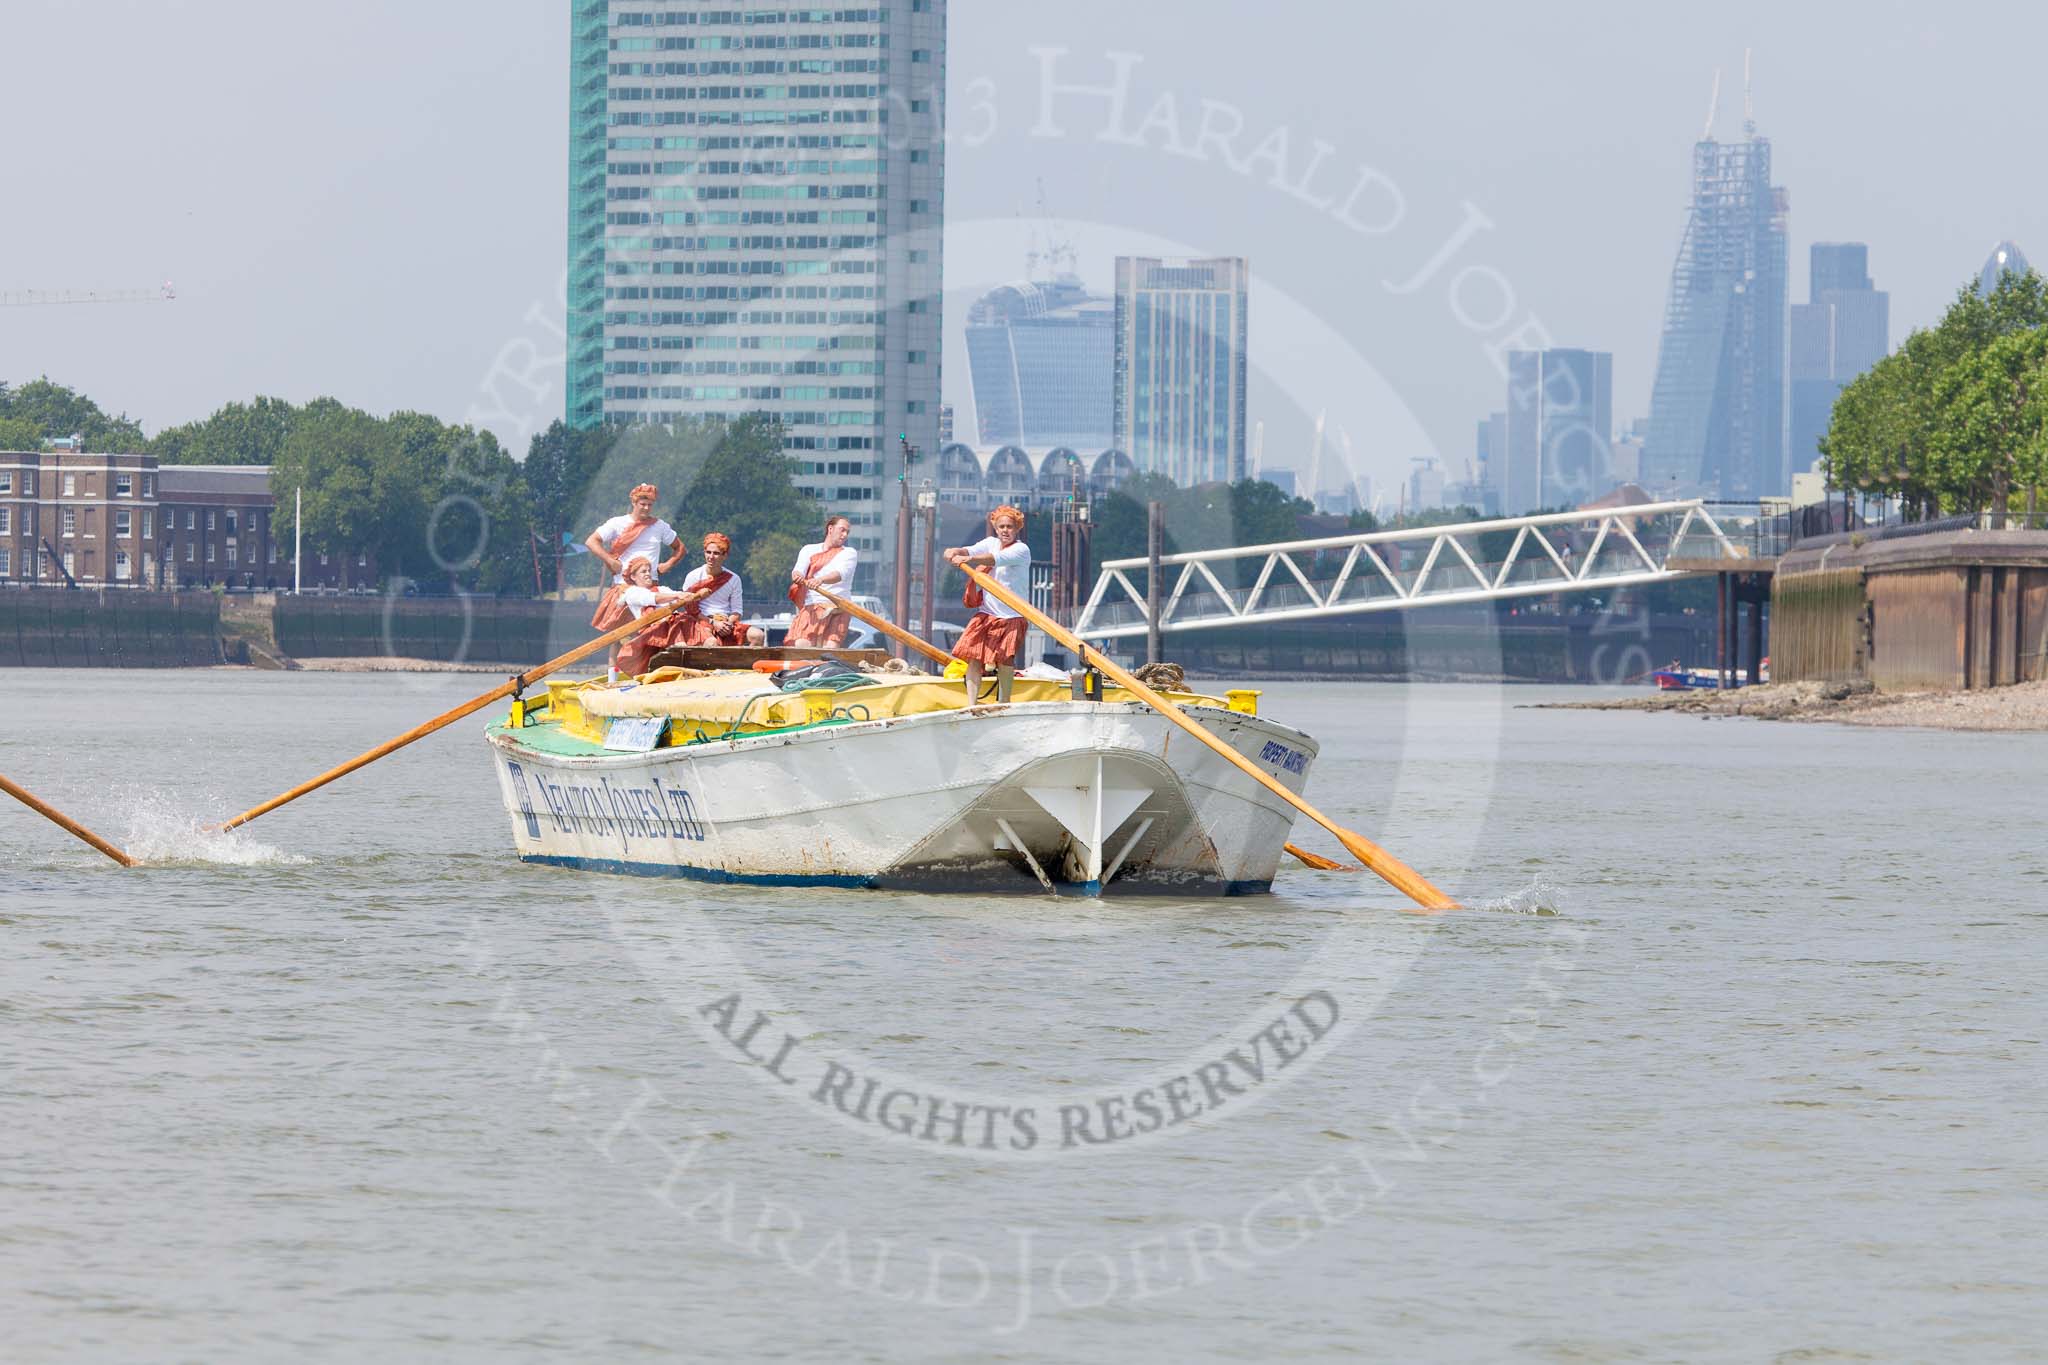 TOW River Thames Barge Driving Race 2013: Barge "Hoppy", by GPS Fabrication, approaching Masthouse Terrace Pier. On the left, only an oar can be seen of barge "Spirit of Mountabatten", by Mechanical Movements and Enabling Services Ltd. In the background the skyscrapers of the City of London..
River Thames between Greenwich and Westminster,
London,

United Kingdom,
on 13 July 2013 at 12:41, image #166